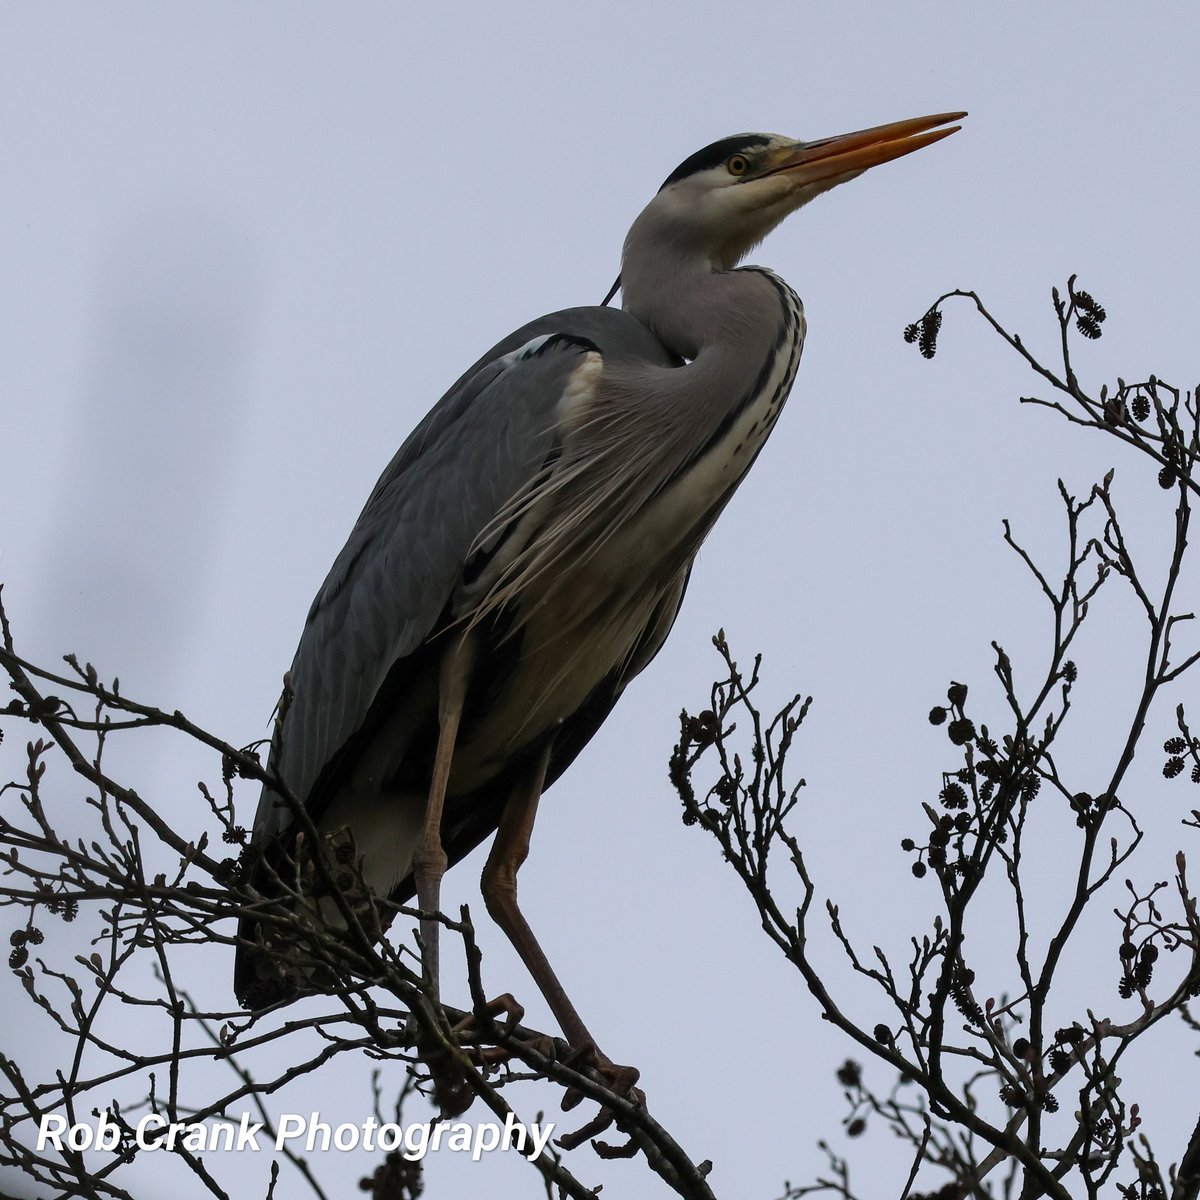 For #WaderWednesday this week I'm going with the Grey Heron perched at the top of a tall tree, hoping to get the best vantage point to spot some food.
#canonphotography #birdphotography #TwitterNaturePhotography #naturelovers #TwitterNatureCommunity #NaturePhotography